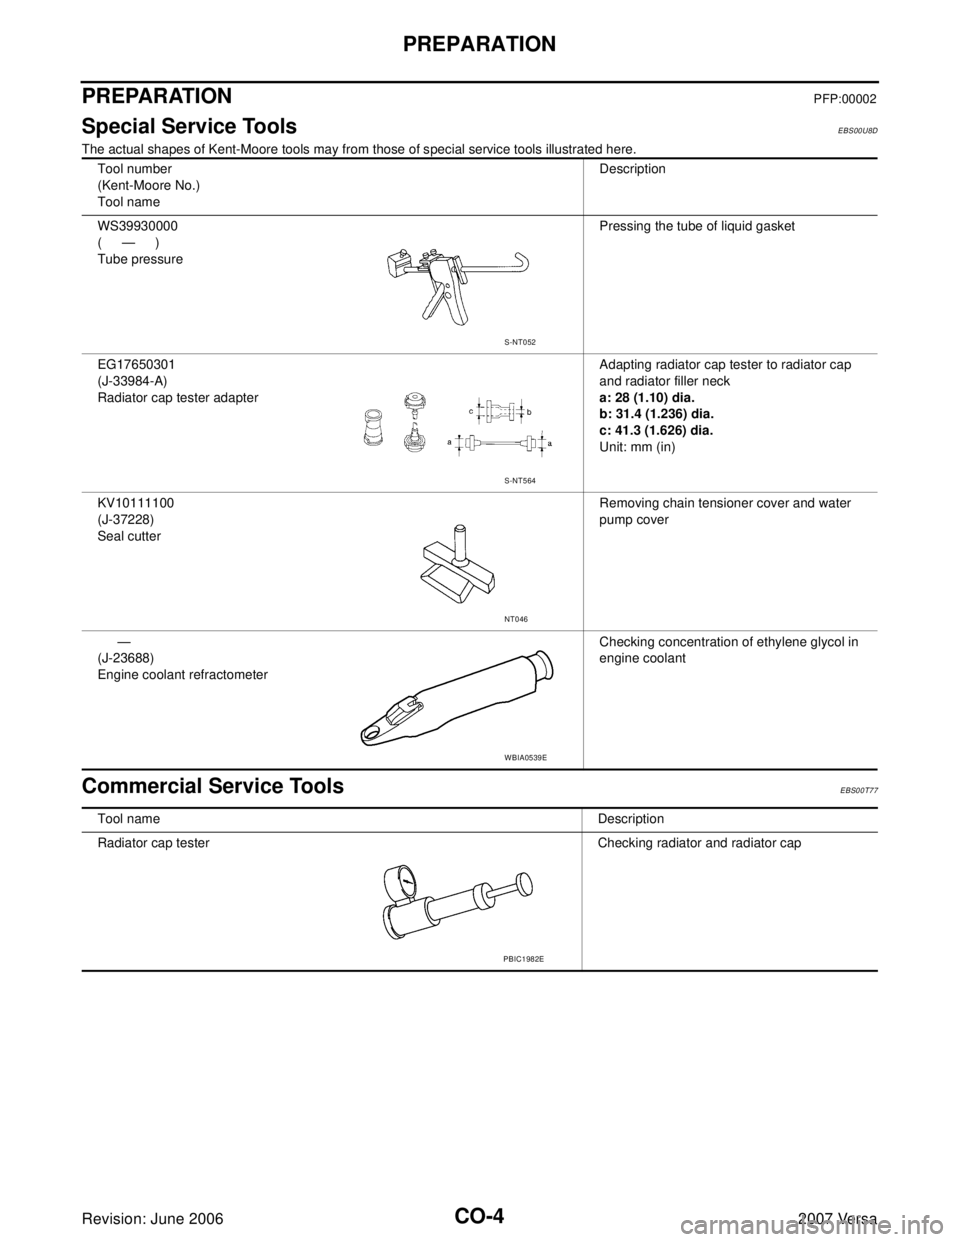 NISSAN TIIDA 2007  Service Repair Manual CO-4Revision: June 2006
PREPARATION
2007 Versa
PREPARATIONPFP:00002
Special Service ToolsEBS00U8D
The actual shapes of Kent-Moore tools may from those of special service tools illustrated here.
Commer